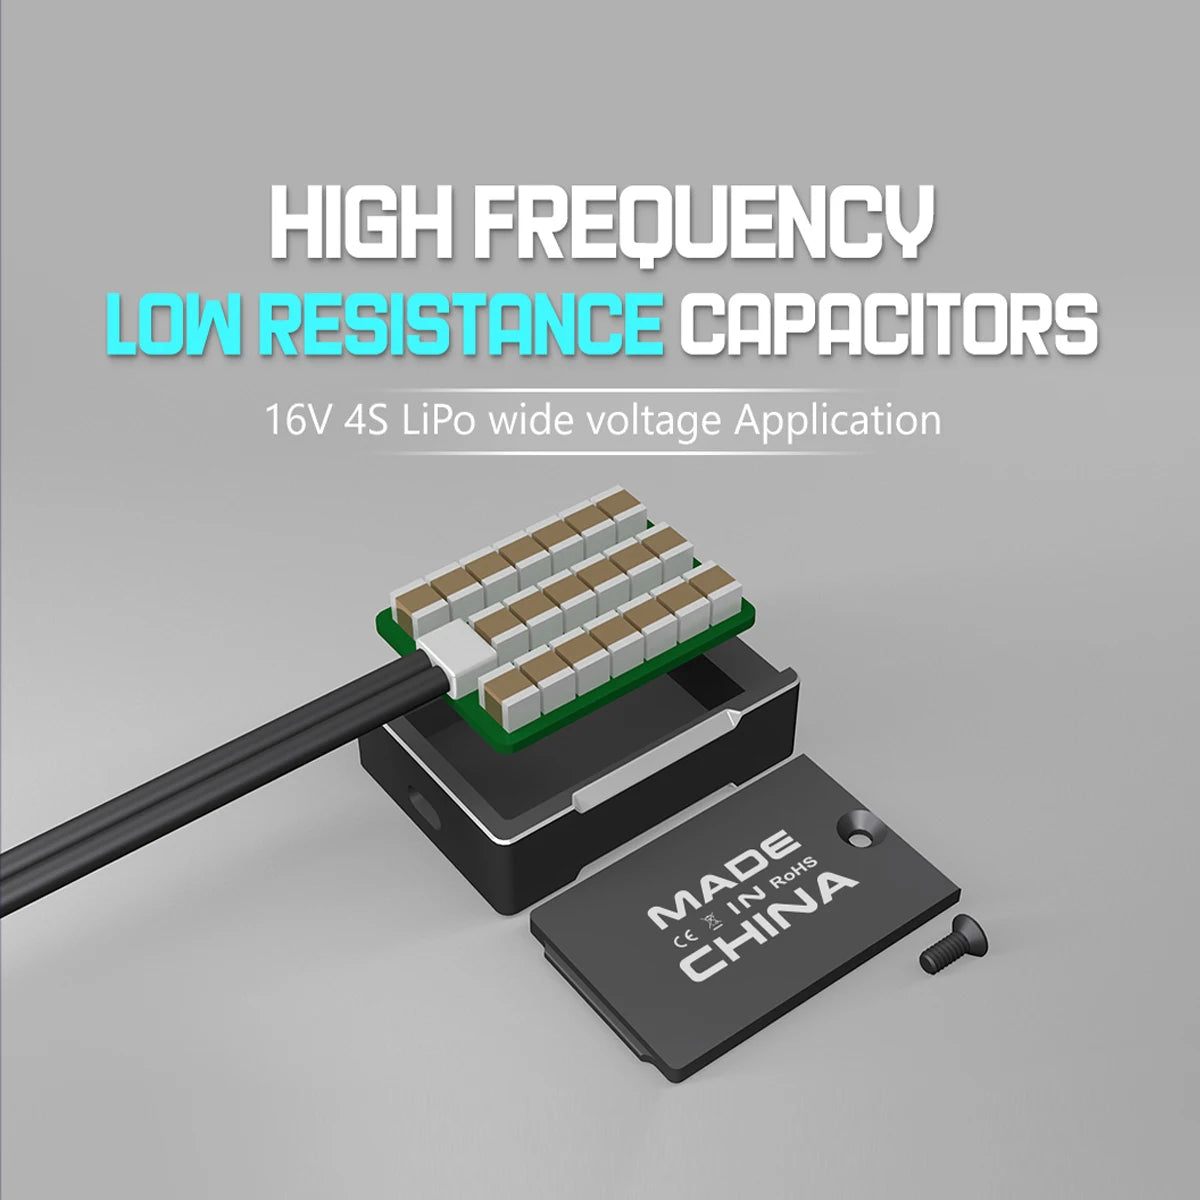 highfreQuenCV Low RESISTANCE CapACiORs 16V 4